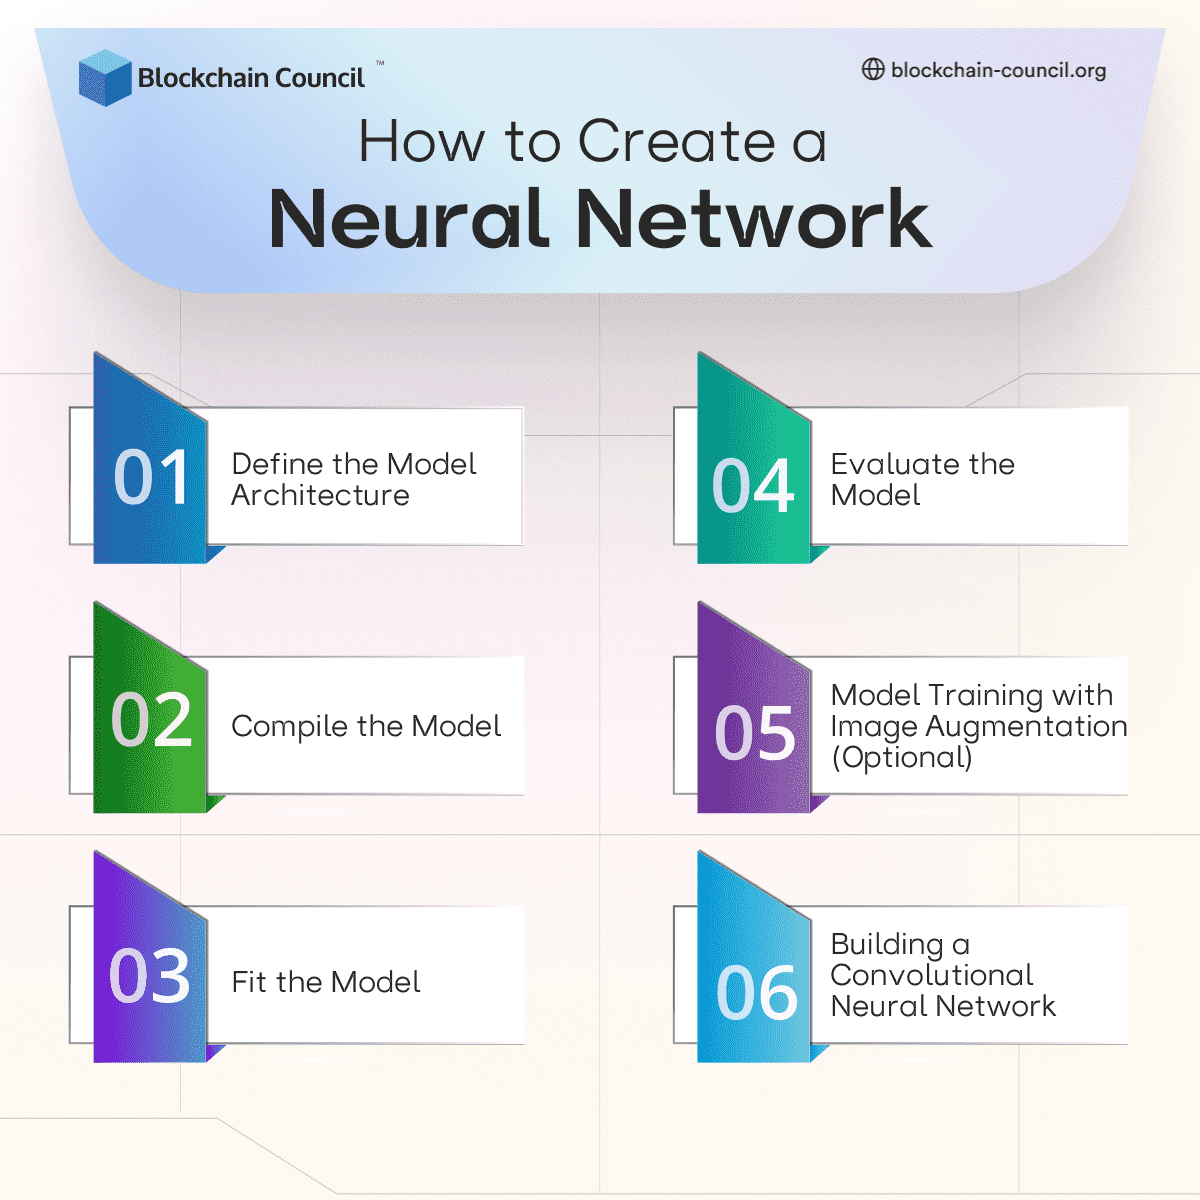 How to Create a Neural Network